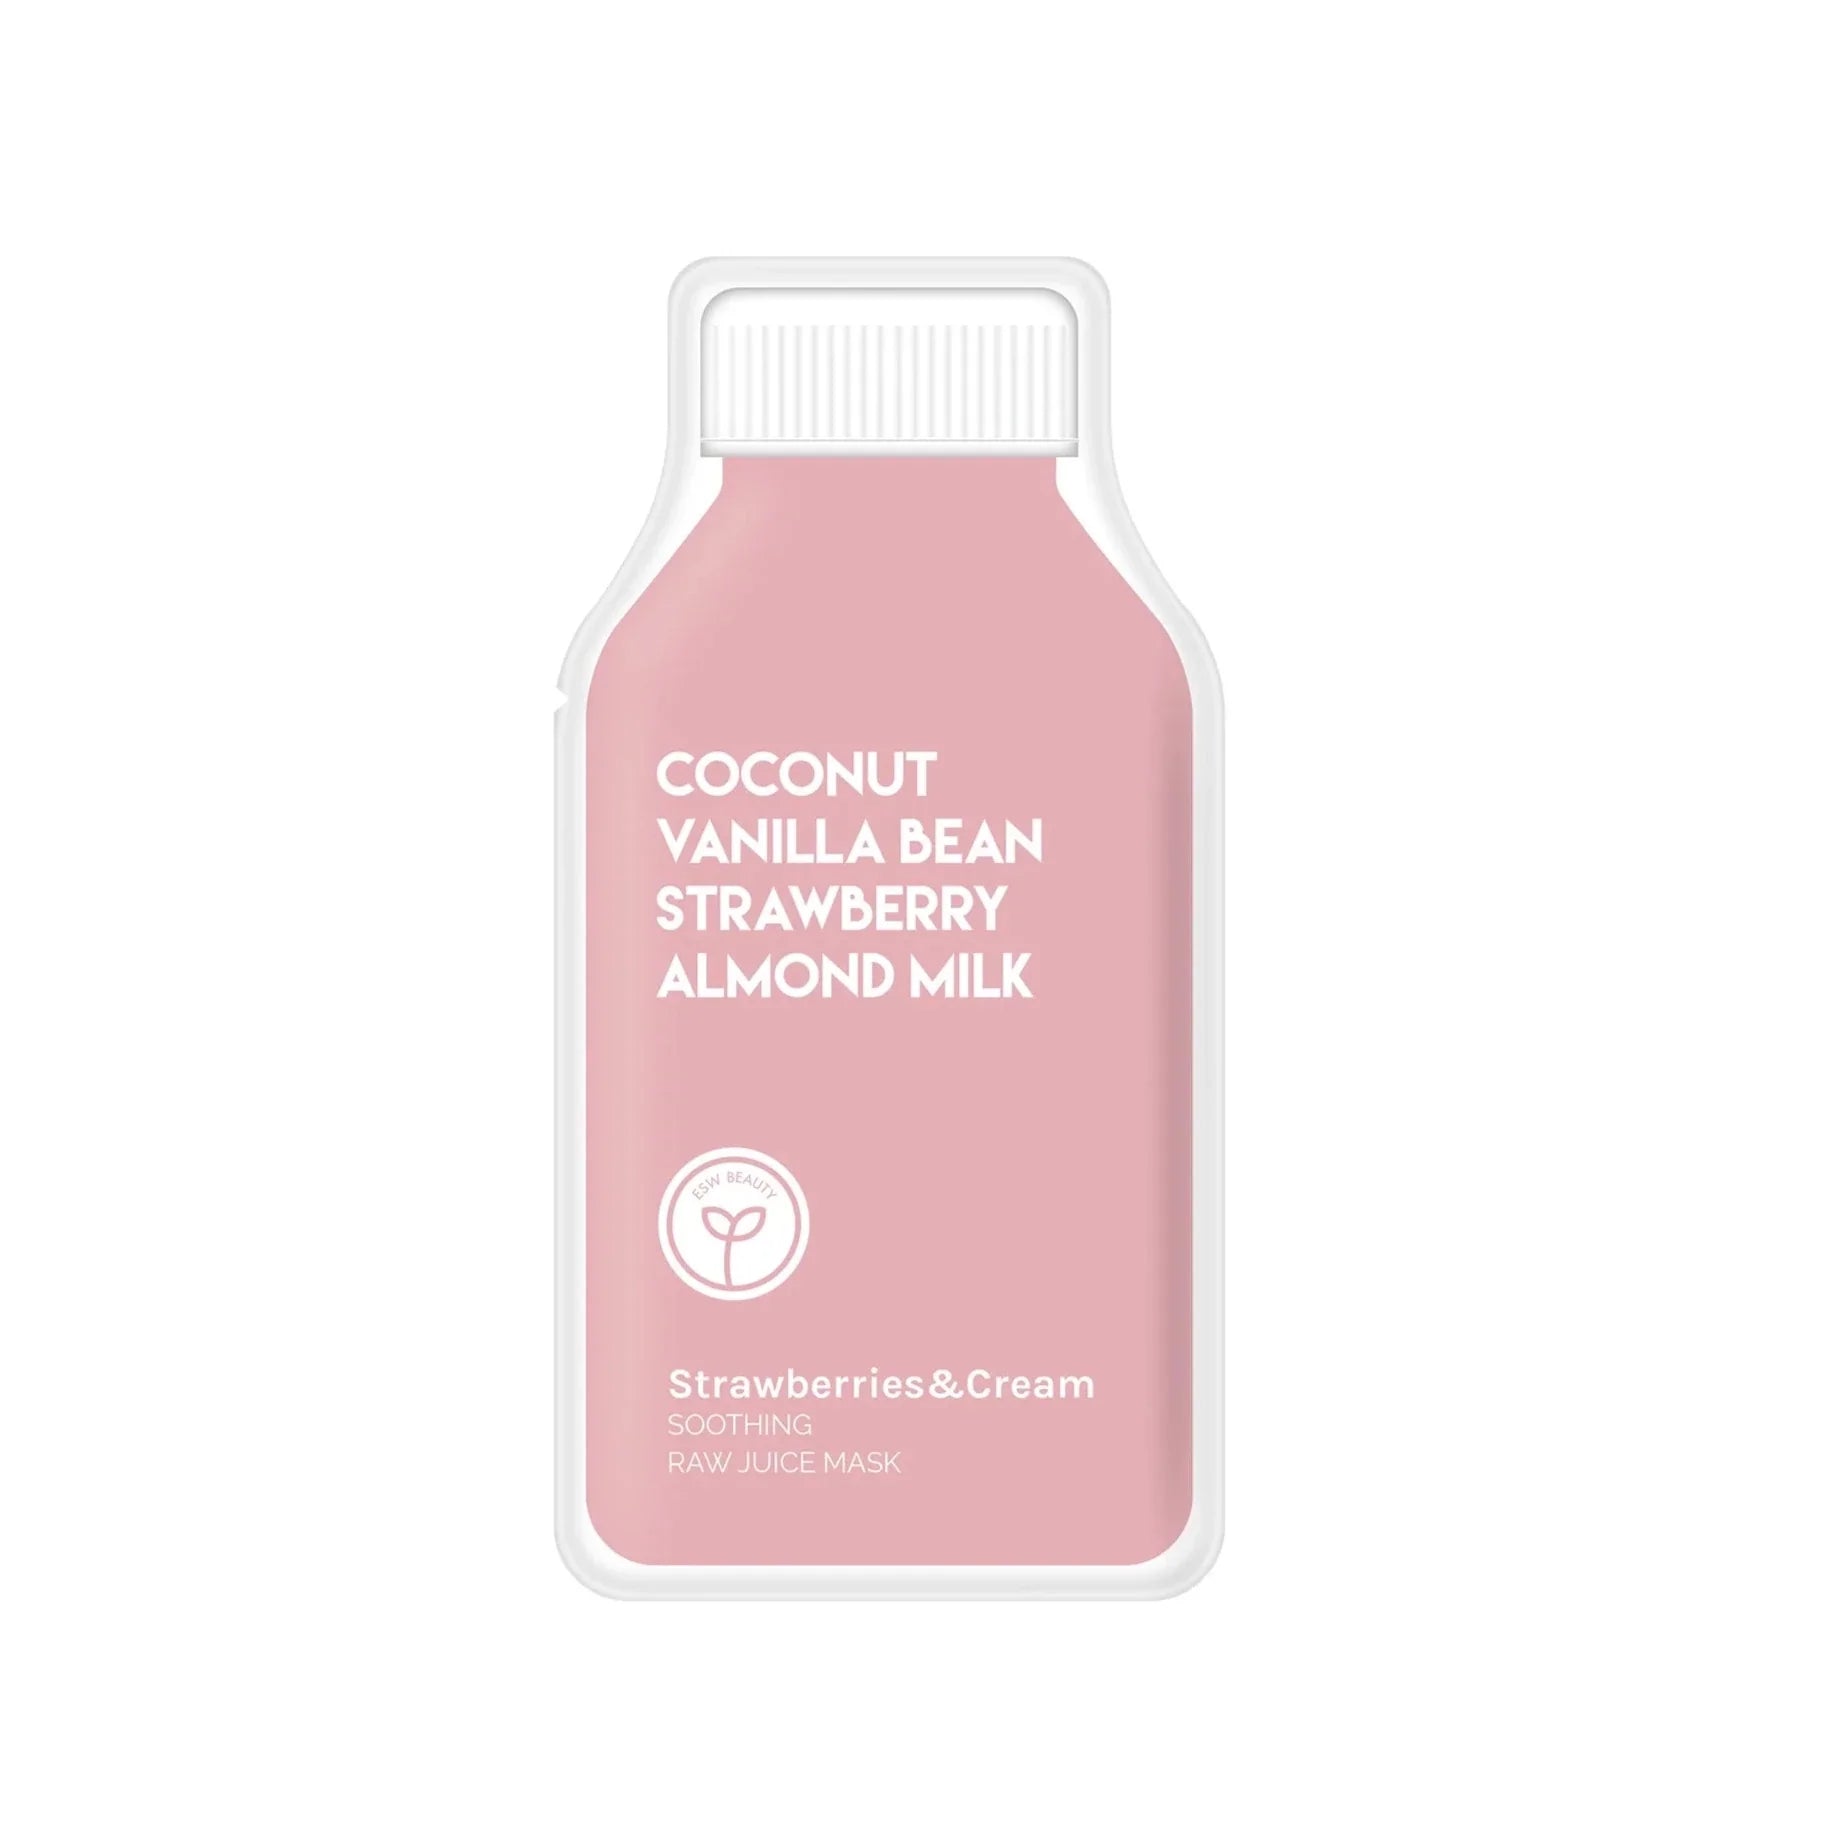 Pink sheet mask packaging that looks like a juice container. Has pink text on it